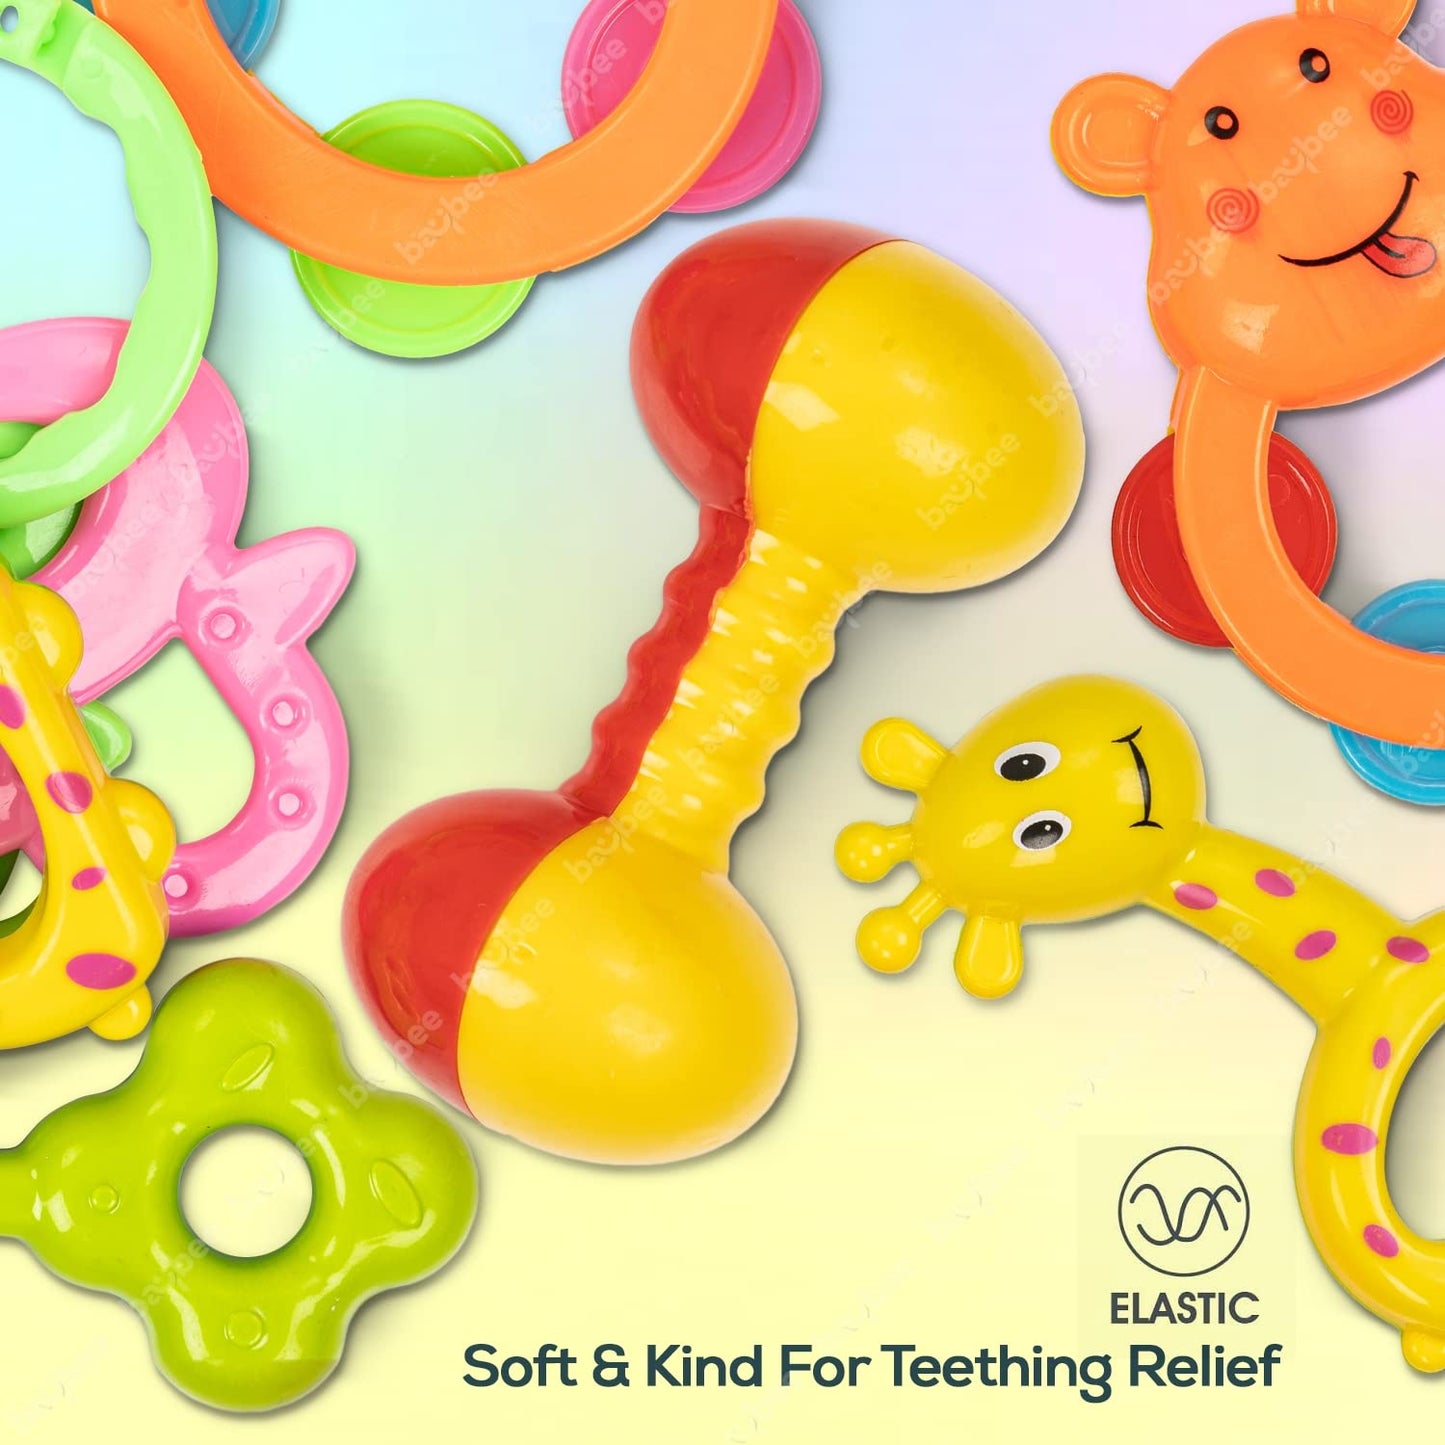 Baybee 5 Pcs Baby Rattles Teether Toys Set for Babies